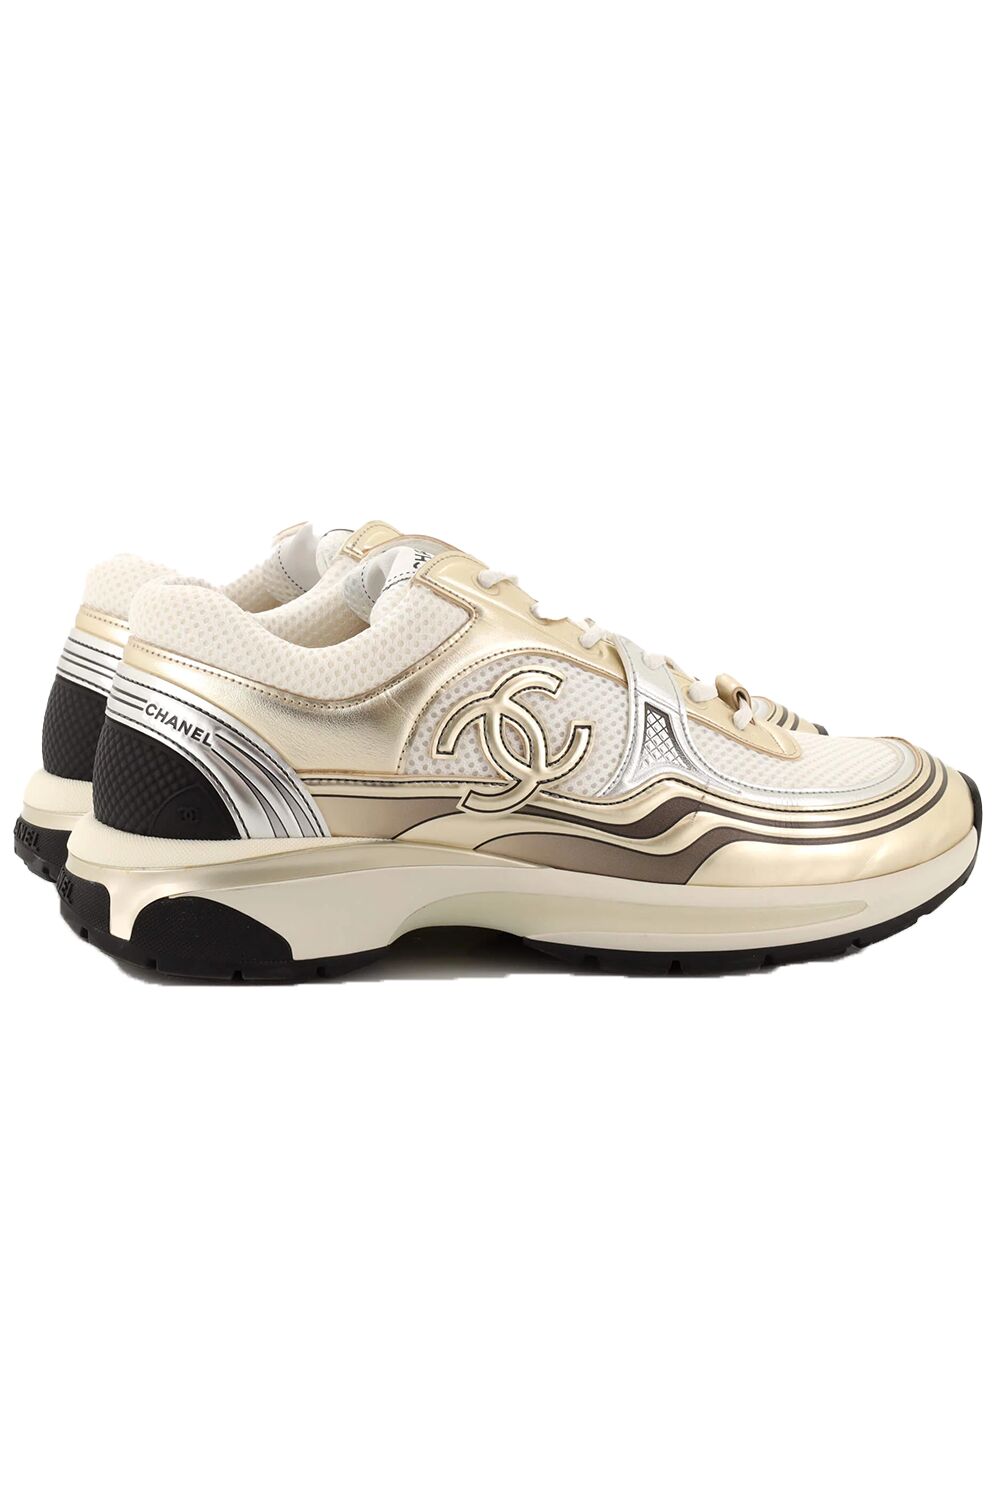 Chanel Women's CC Low-Top Sneakers Fabric and Laminated Leather Silver  2385983